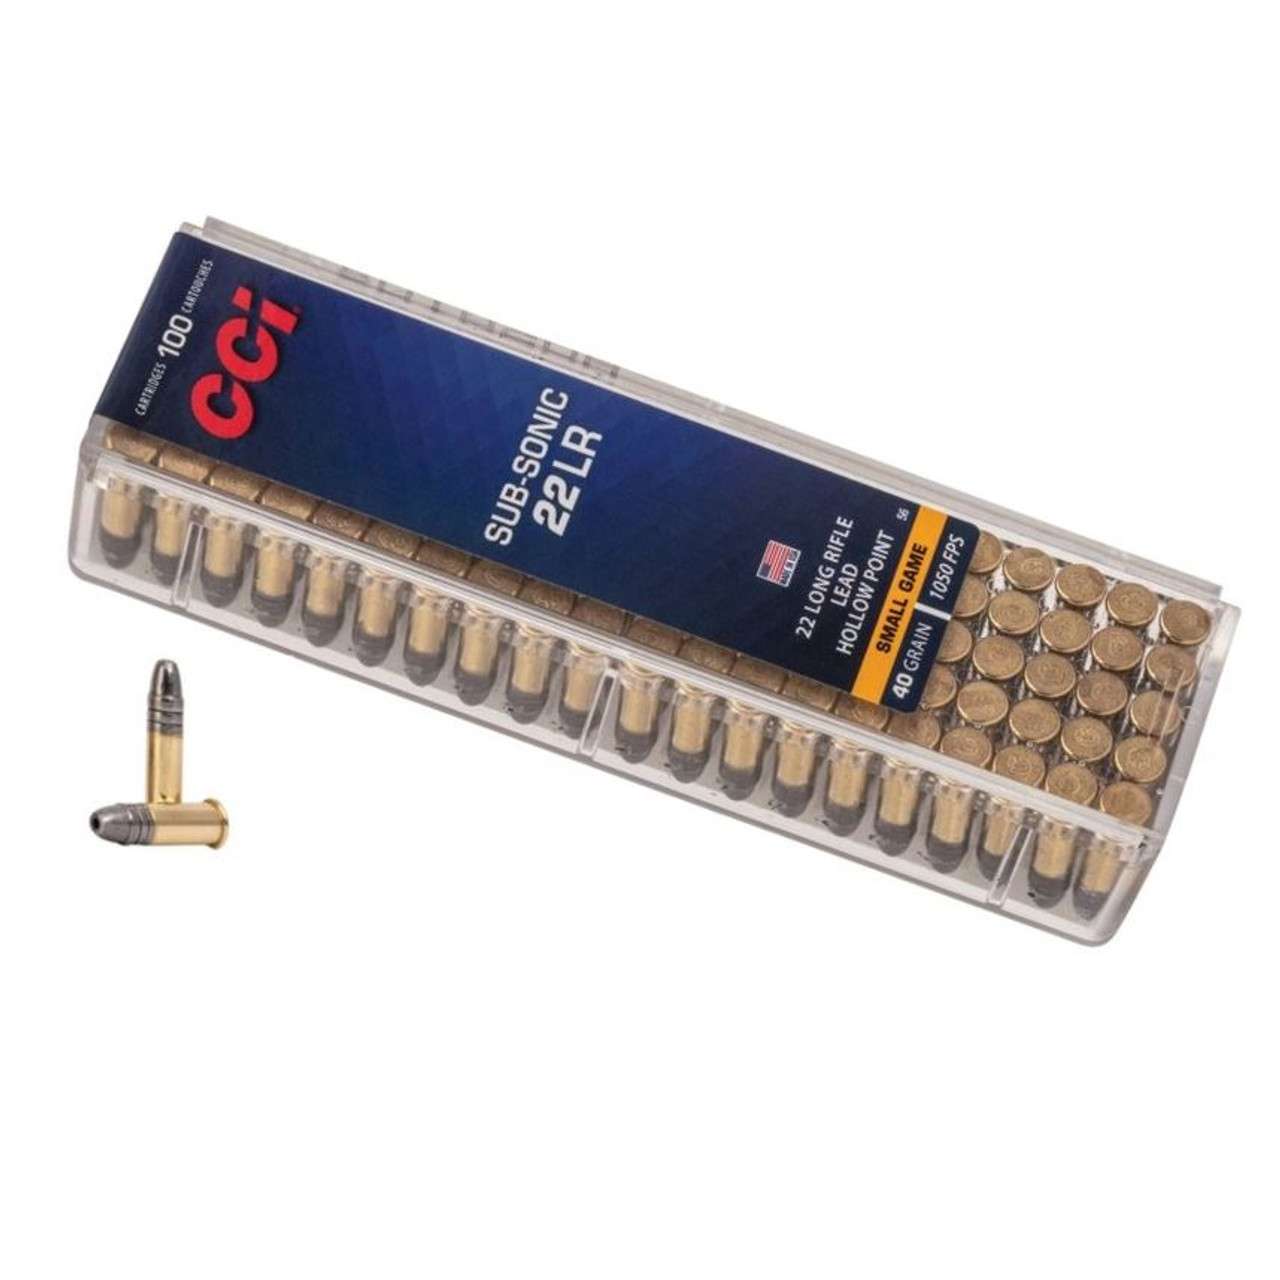 CCI .22LR Subsonic 40 grain 1050fps Hollow Point 100 Rounds